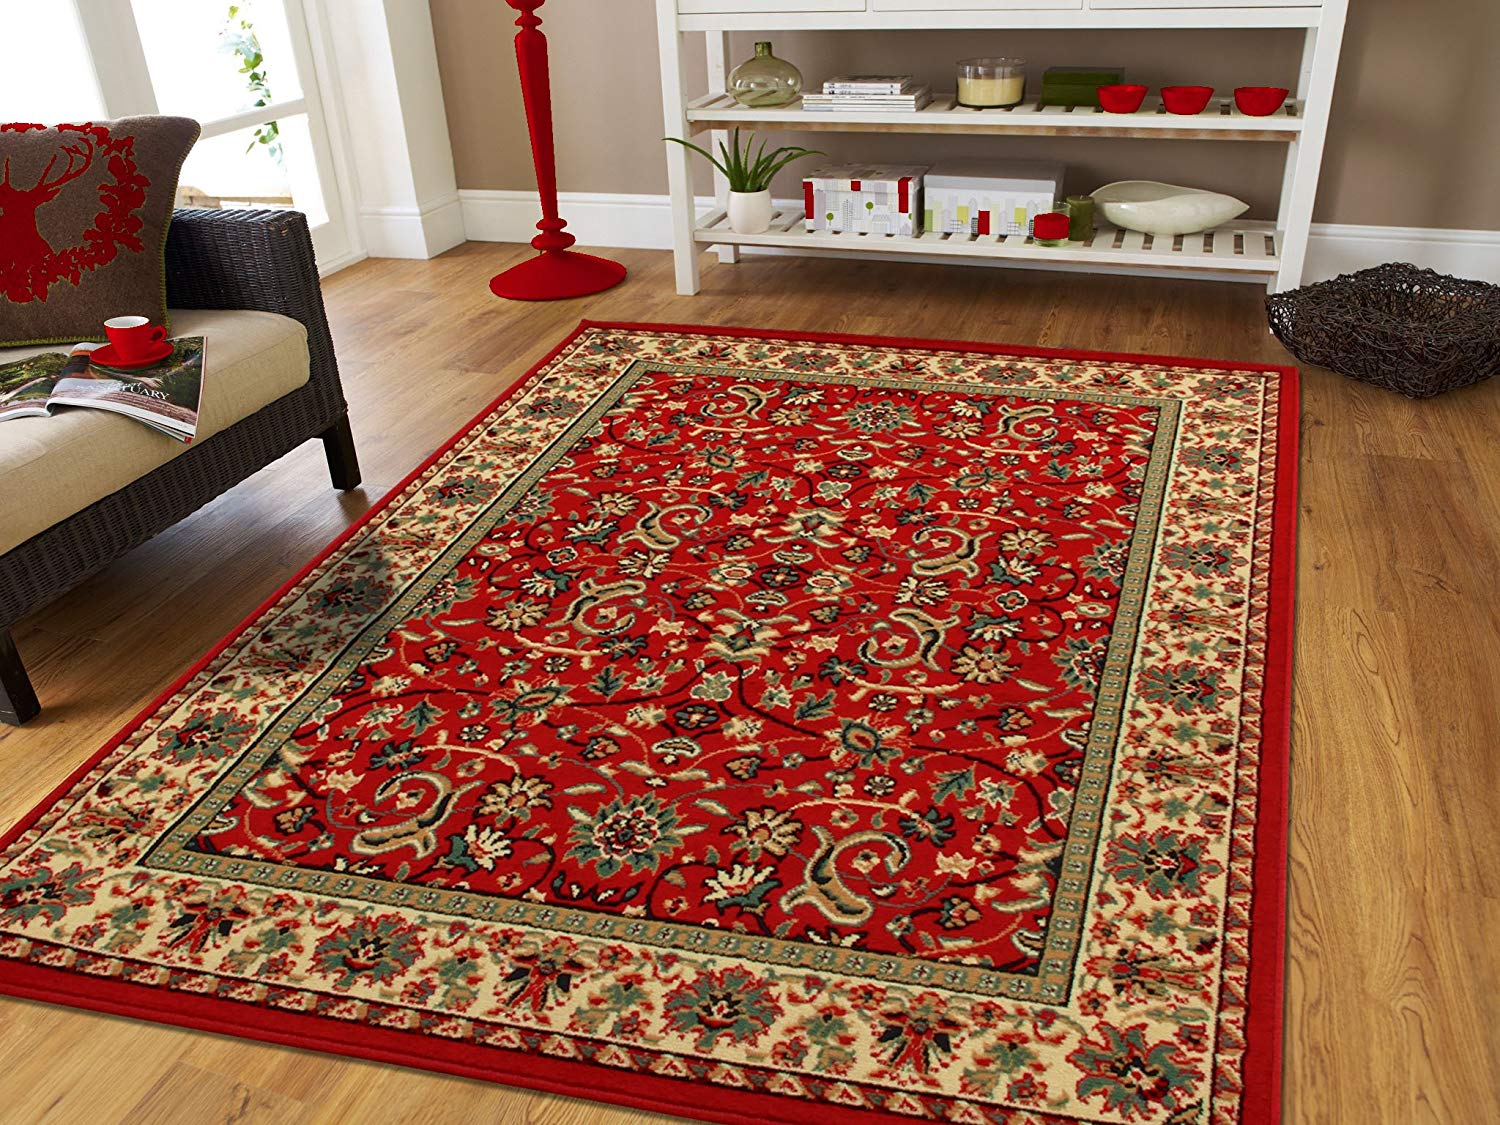 Enhancing the beauty of your floor with persian rugs